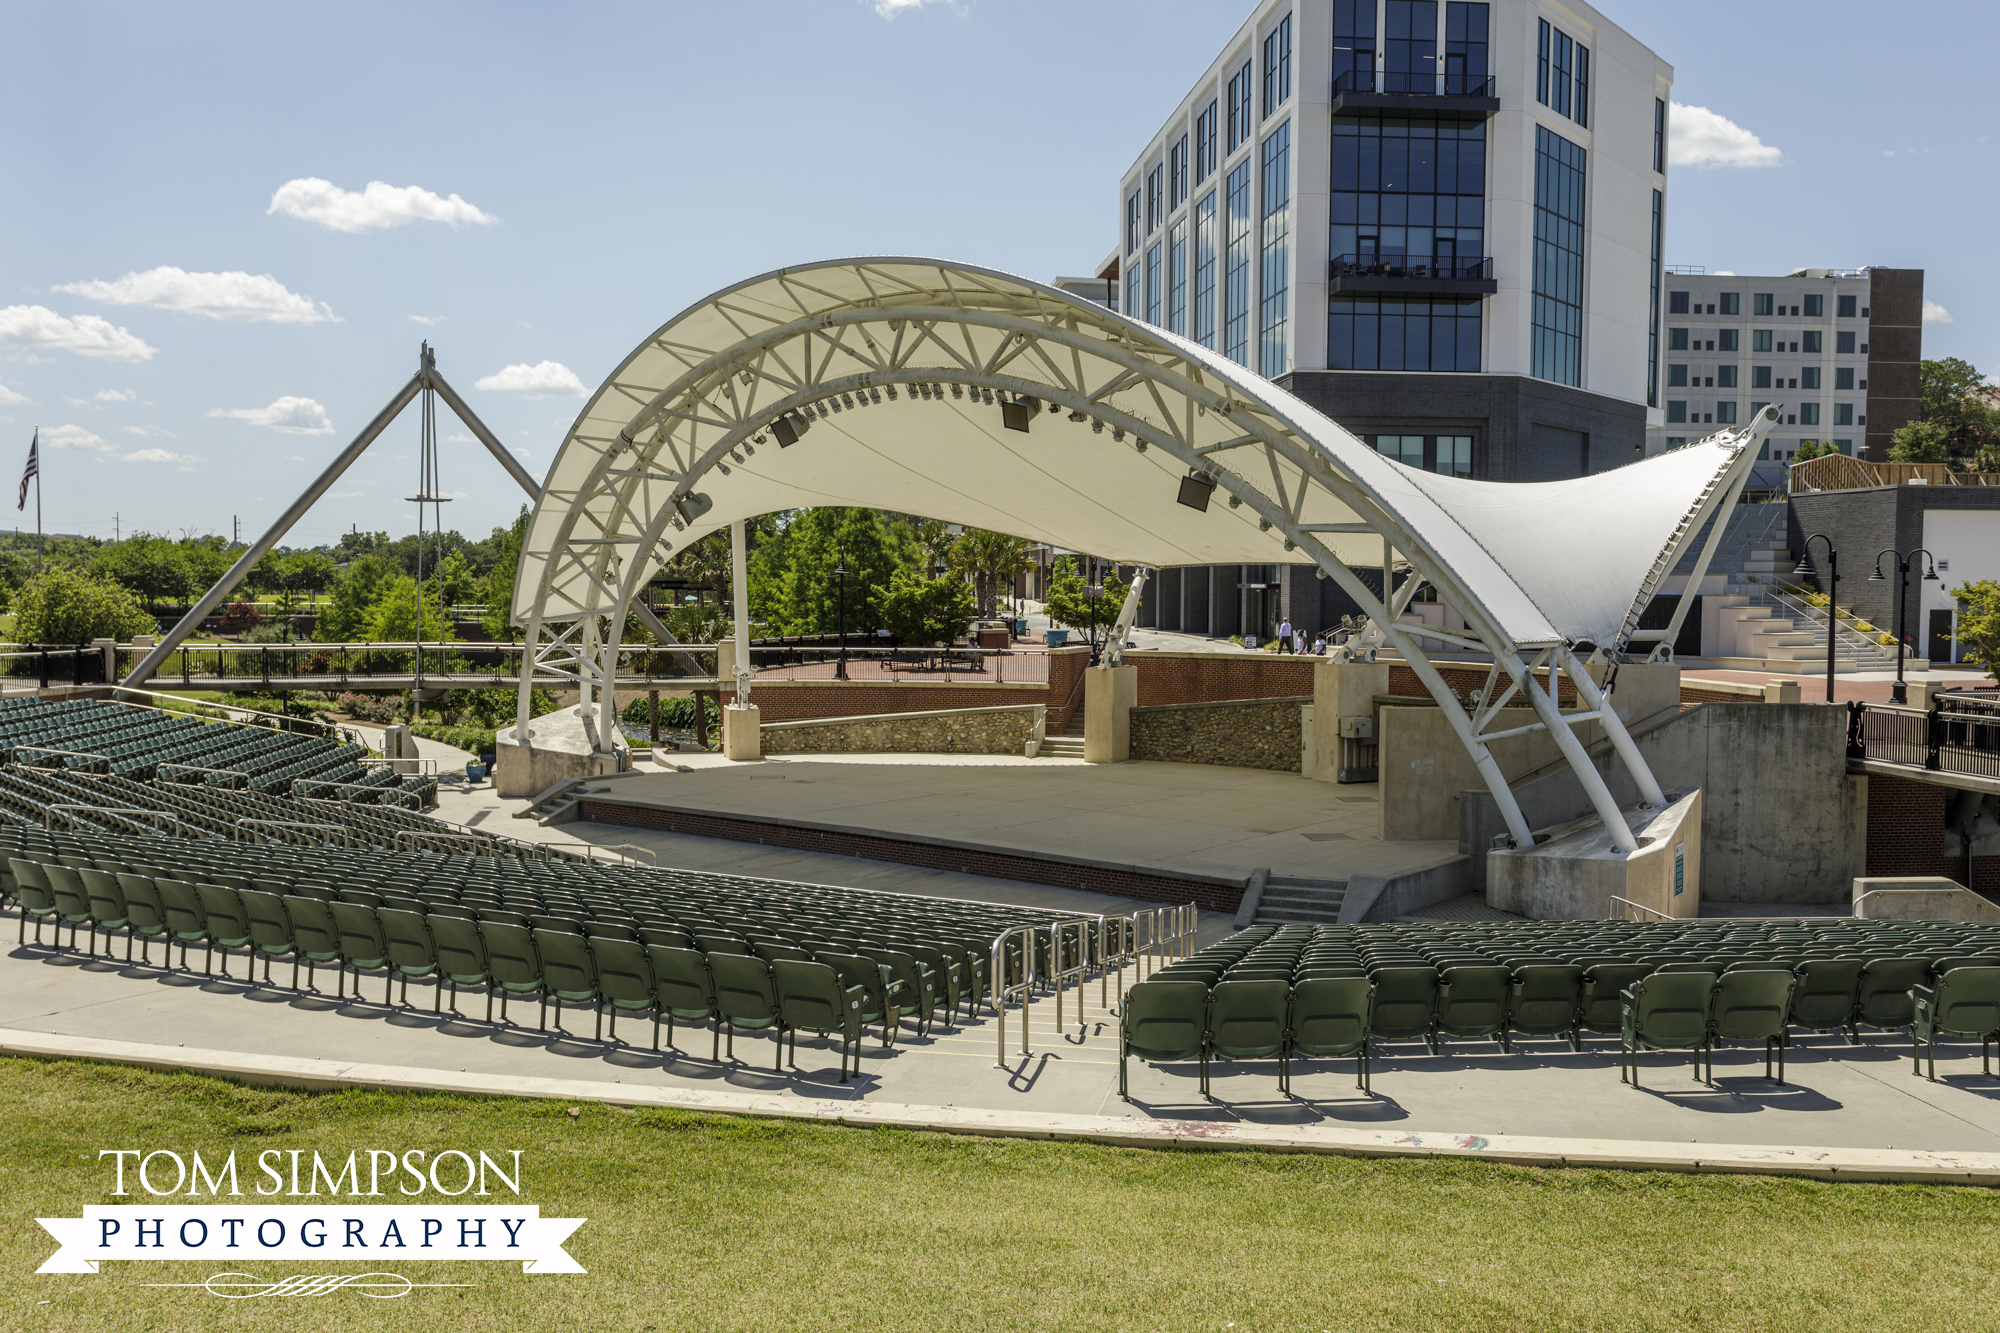 amphitheater has something for all ages to enjoy